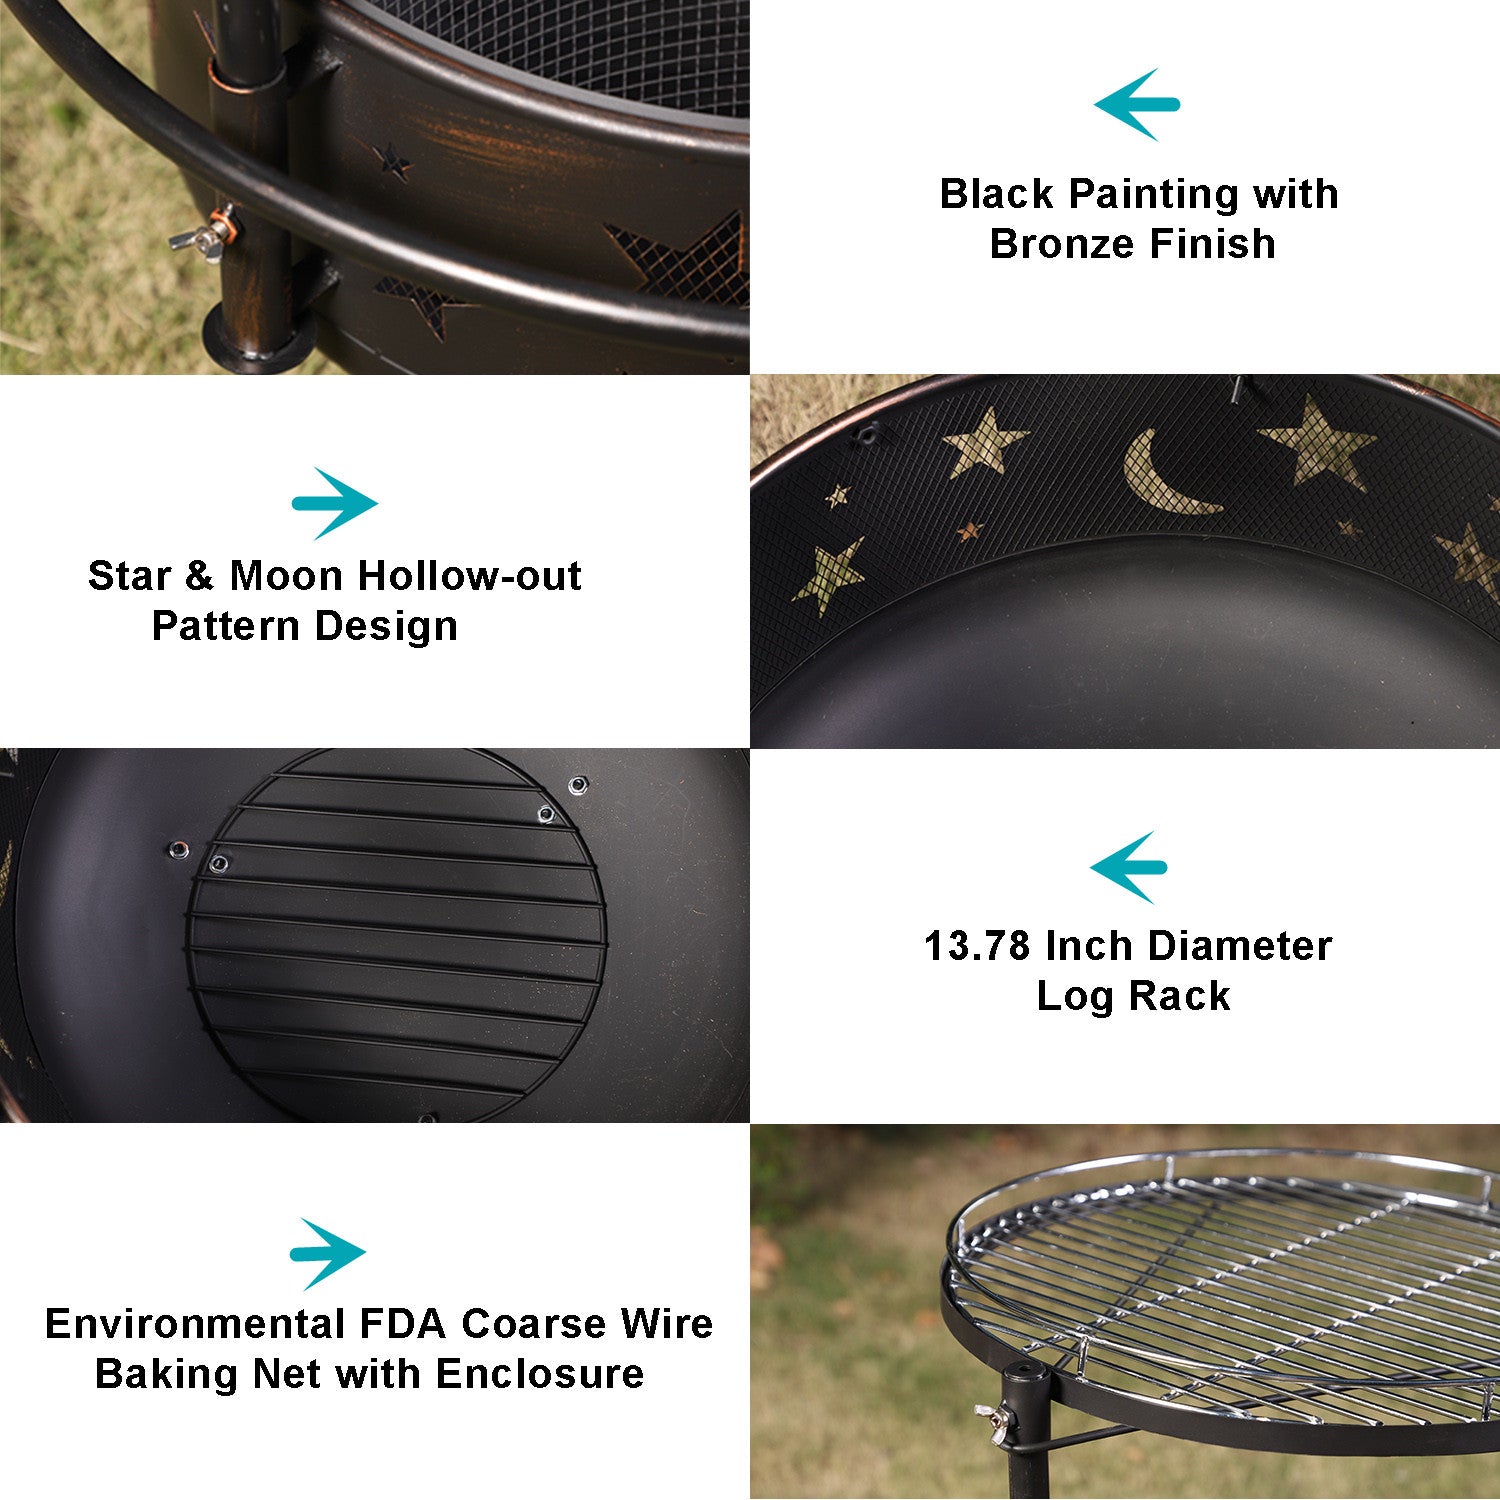 PHI VILLA 30" 2-In-1 Moon & Star Pattern Patio Fire Pit with Grilling Grid